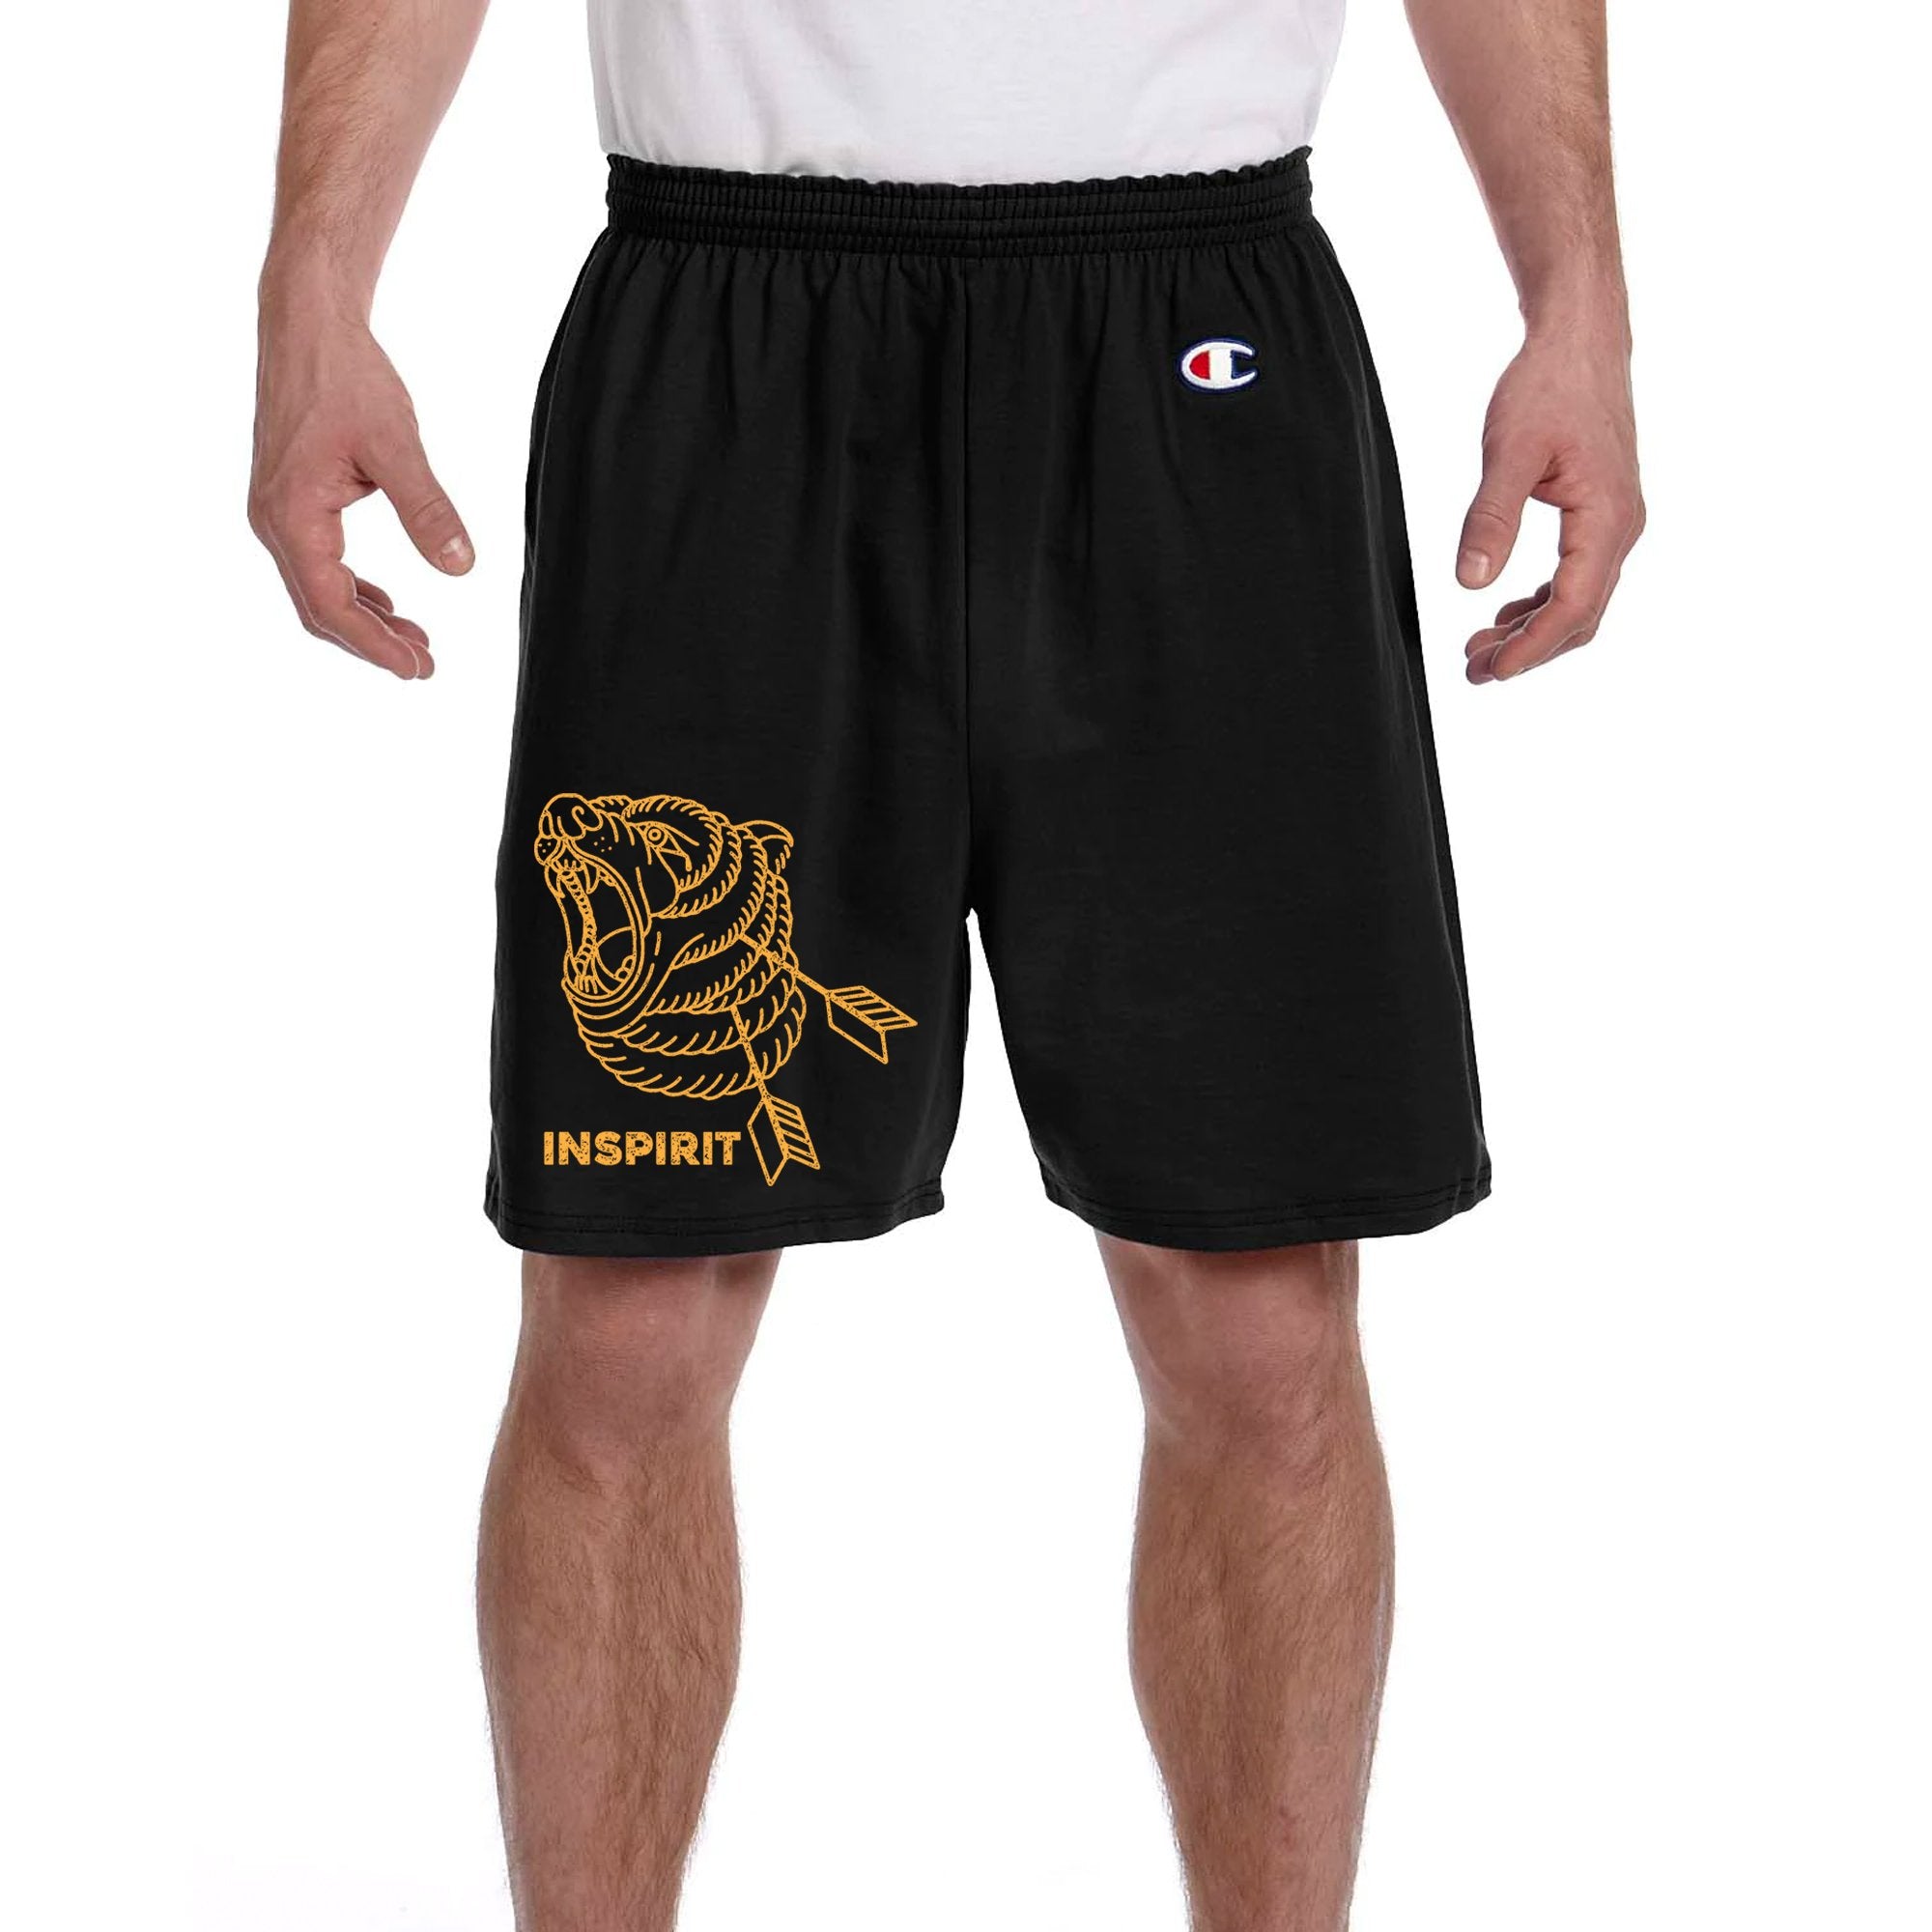 Inspirit - Grizzly Champion® Shorts